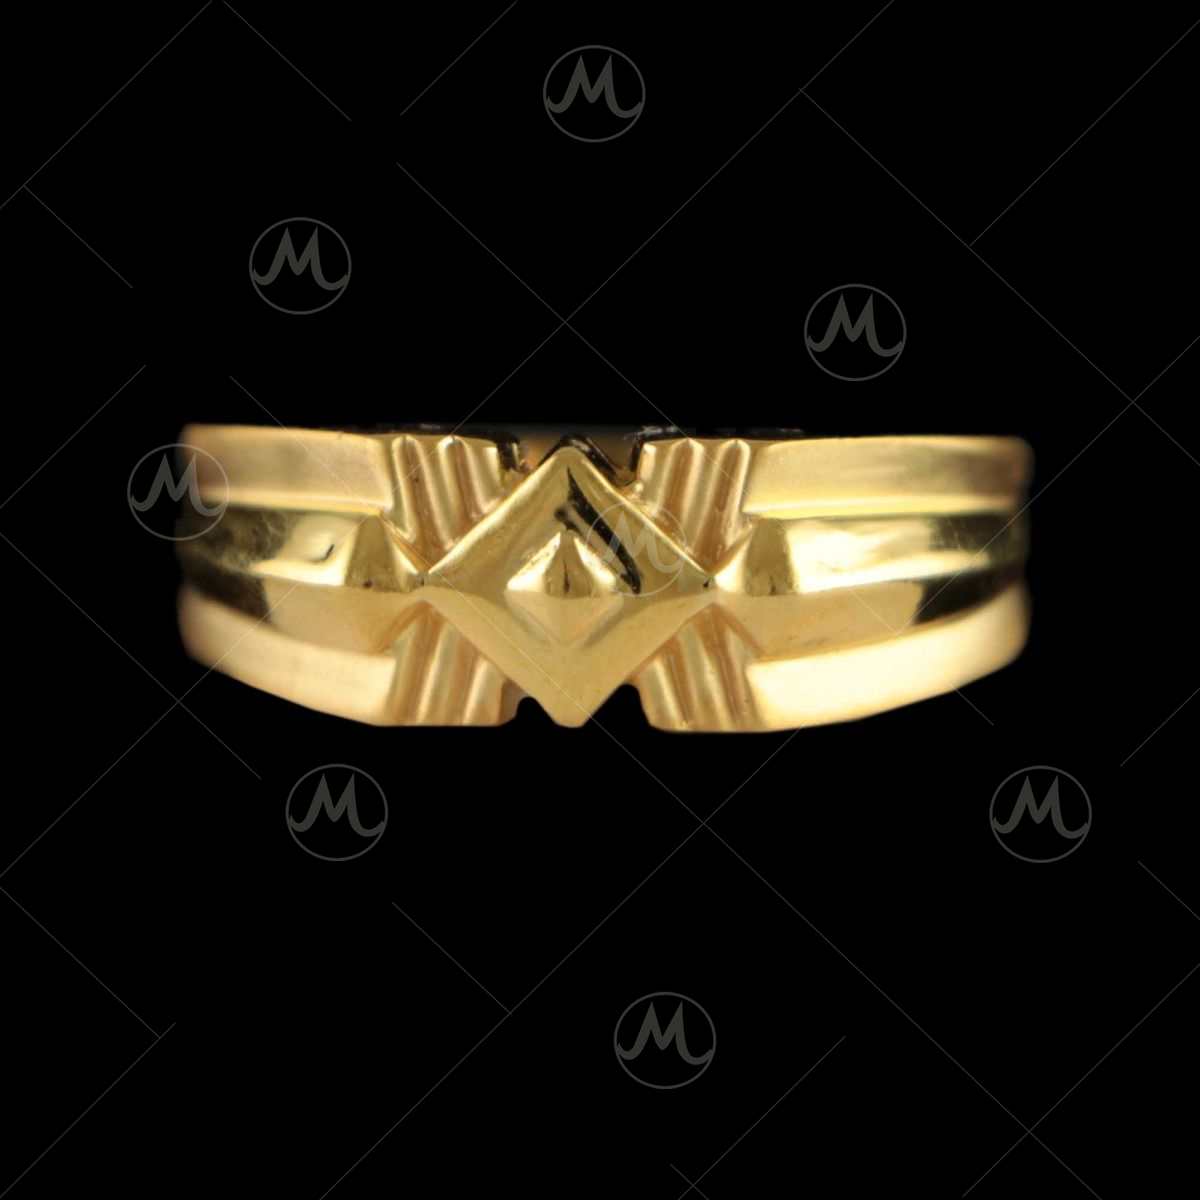 Gents Gold Rings Manufacturers, Suppliers, Dealers & Prices